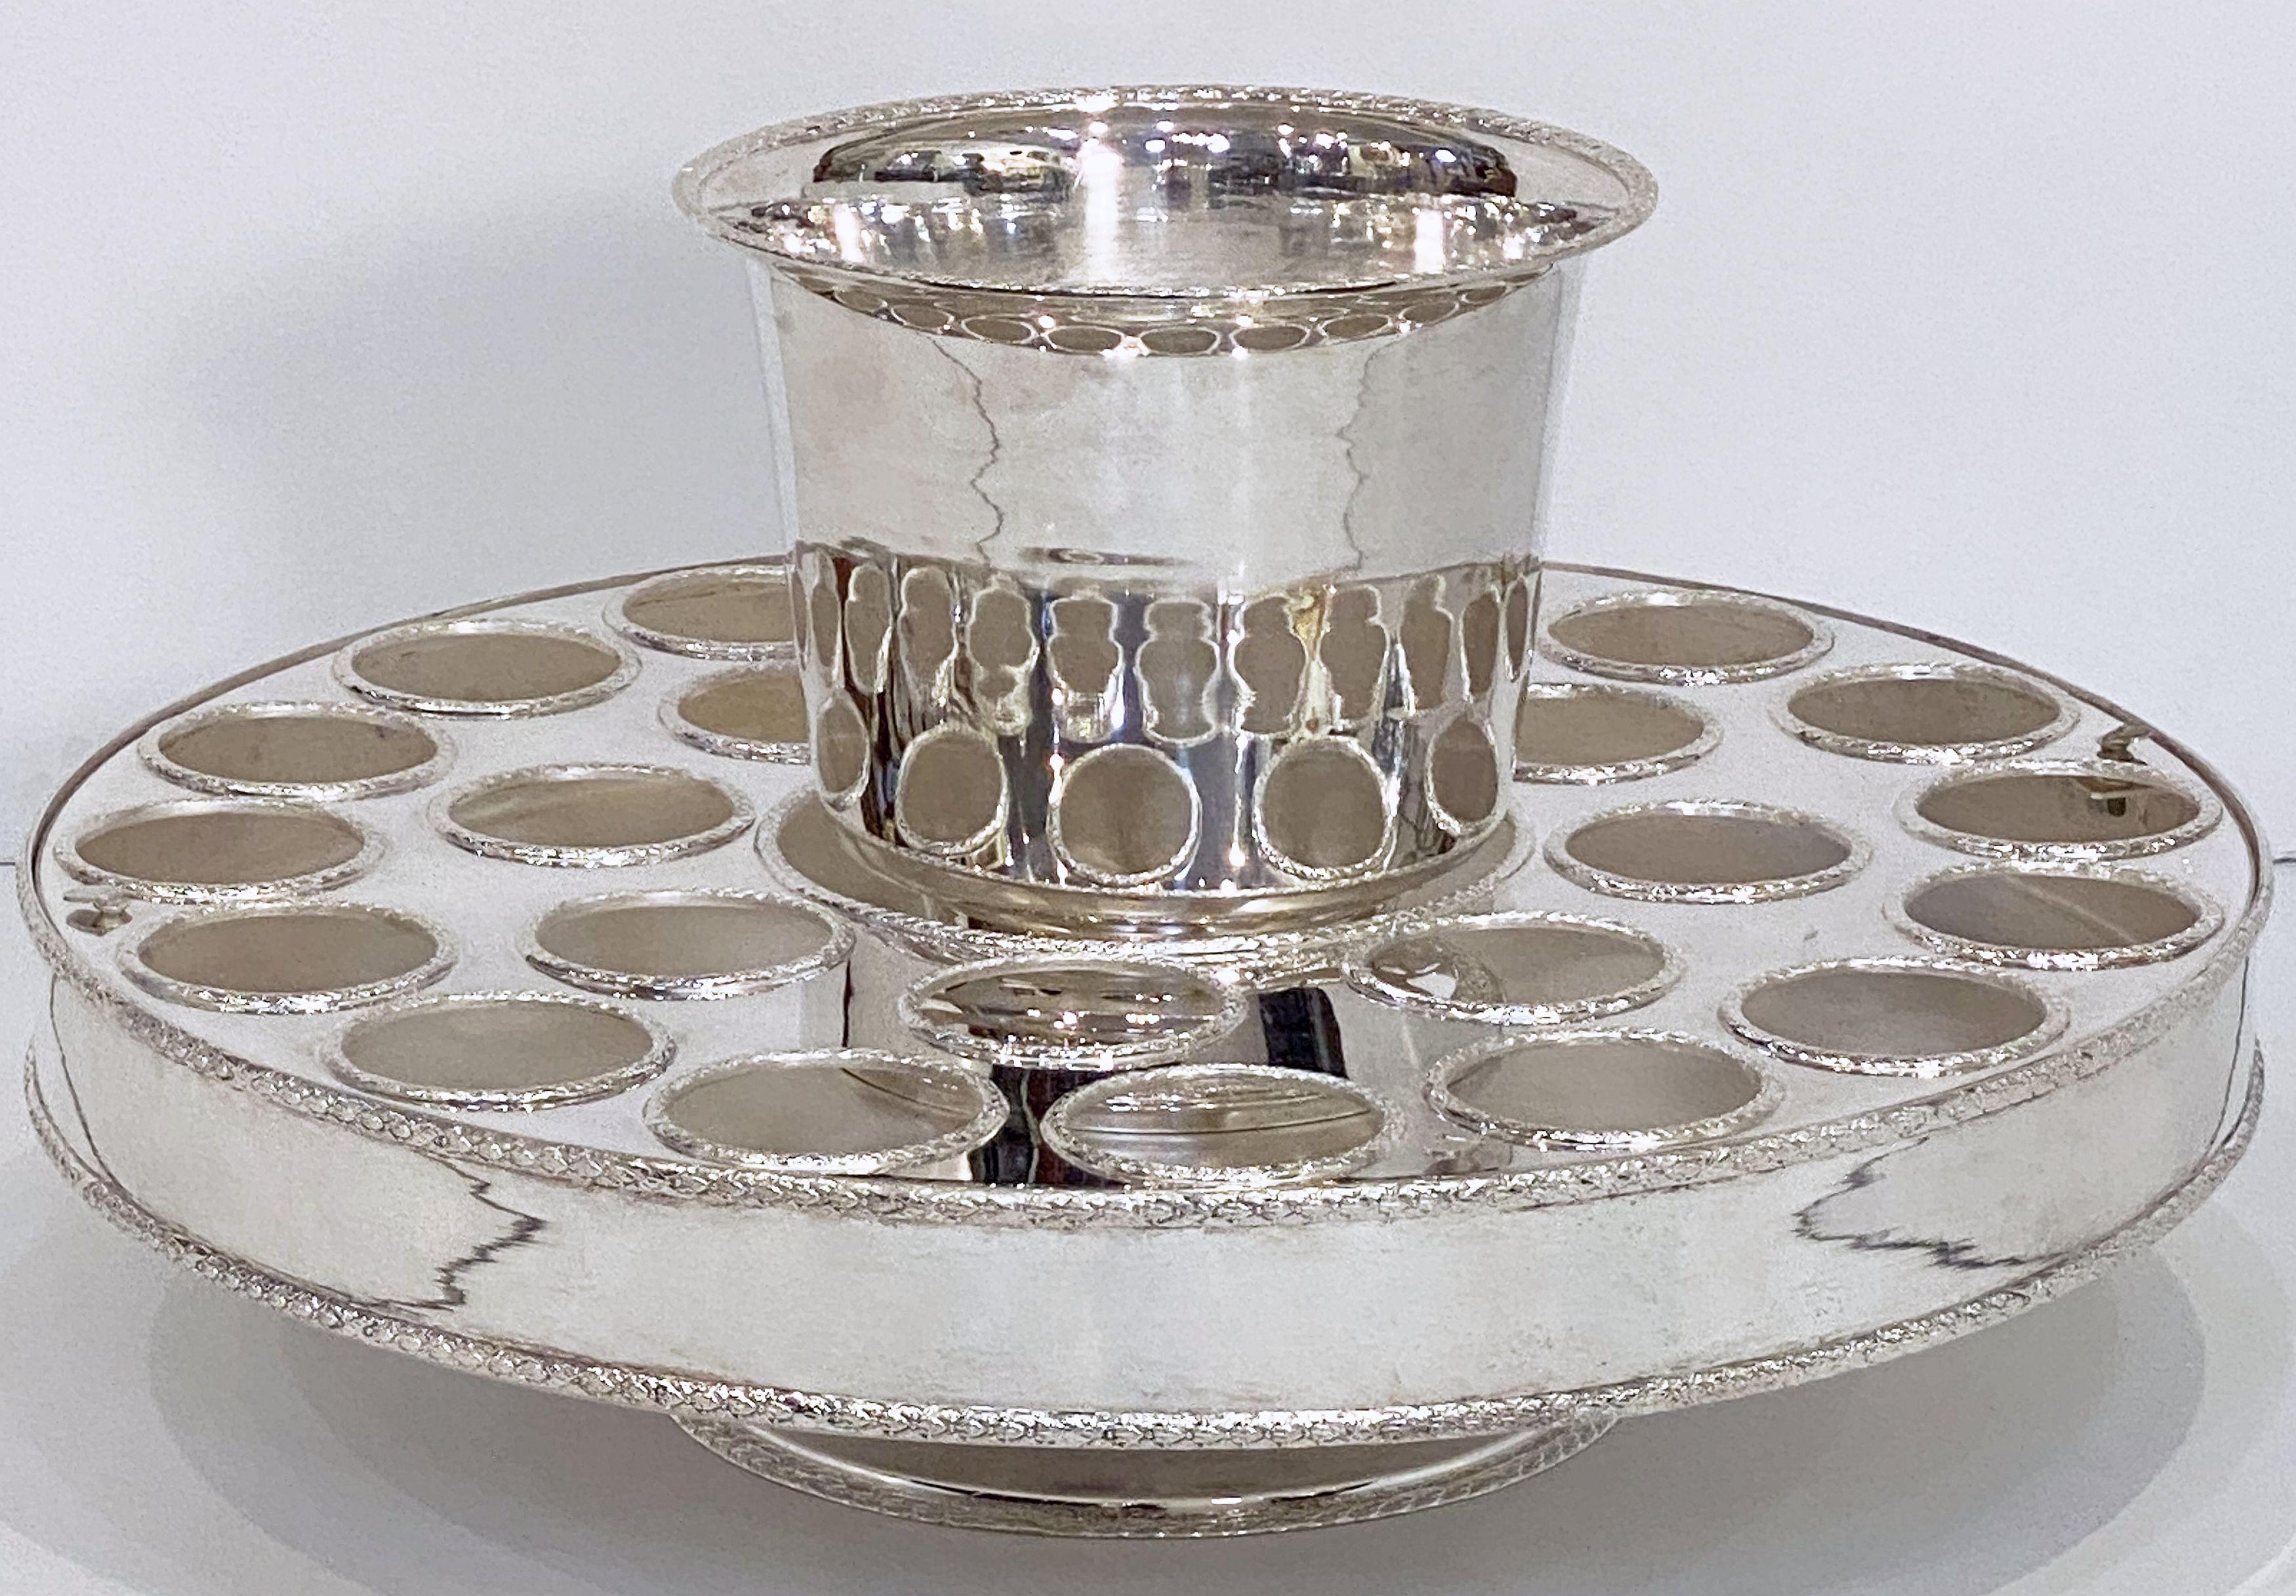 Italian Silver Champagne Service with Revolving Stand, Wine Cooler, and Glasses 1